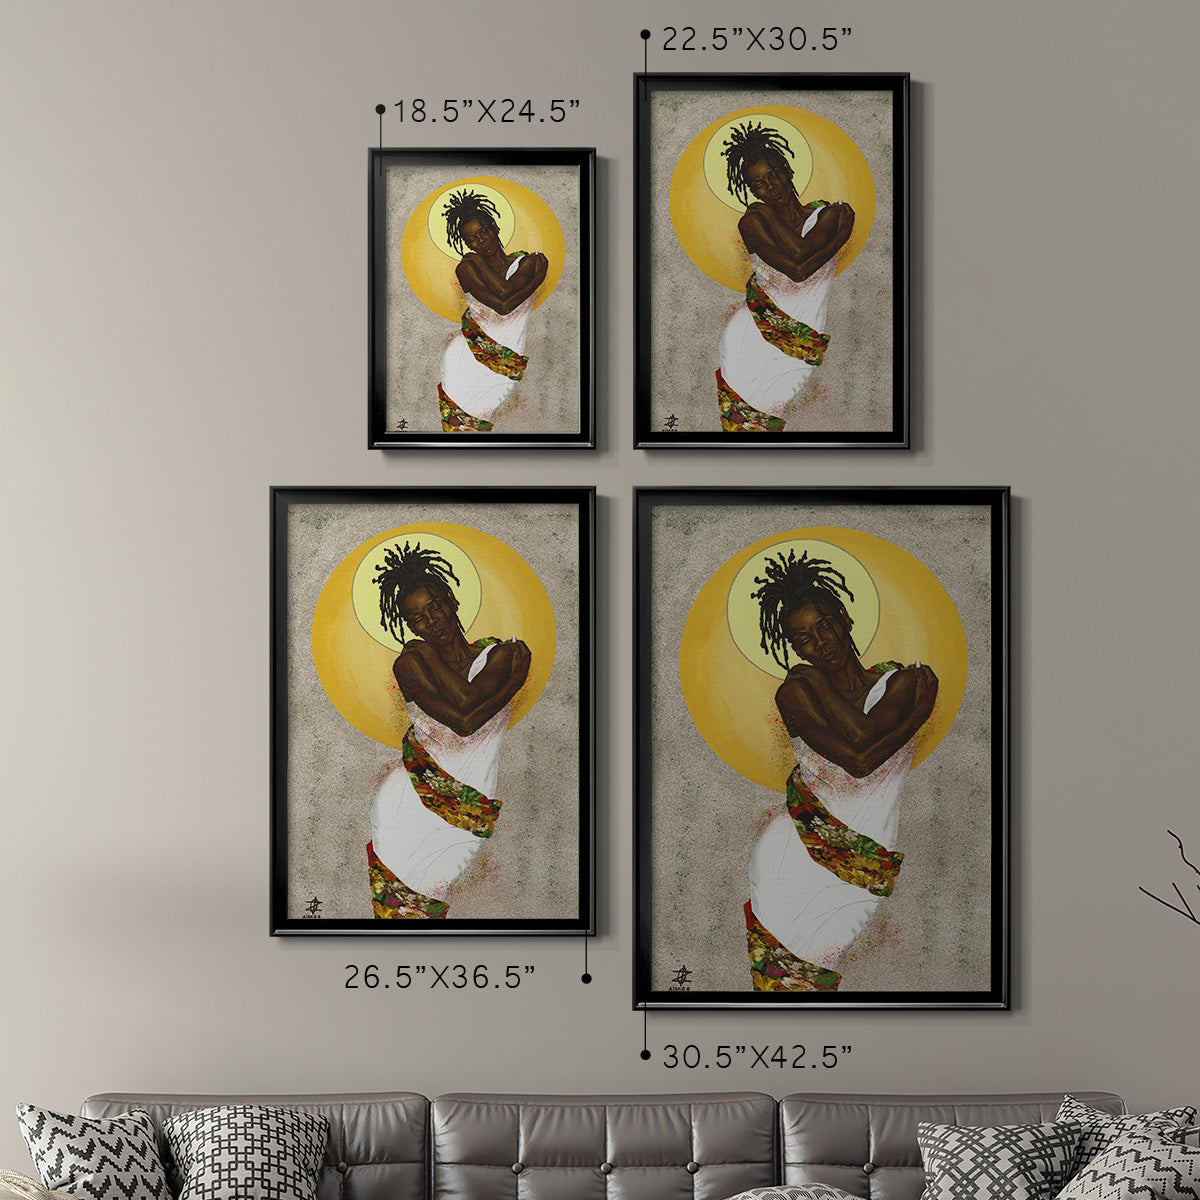 Her Love Premium Framed Print - Ready to Hang